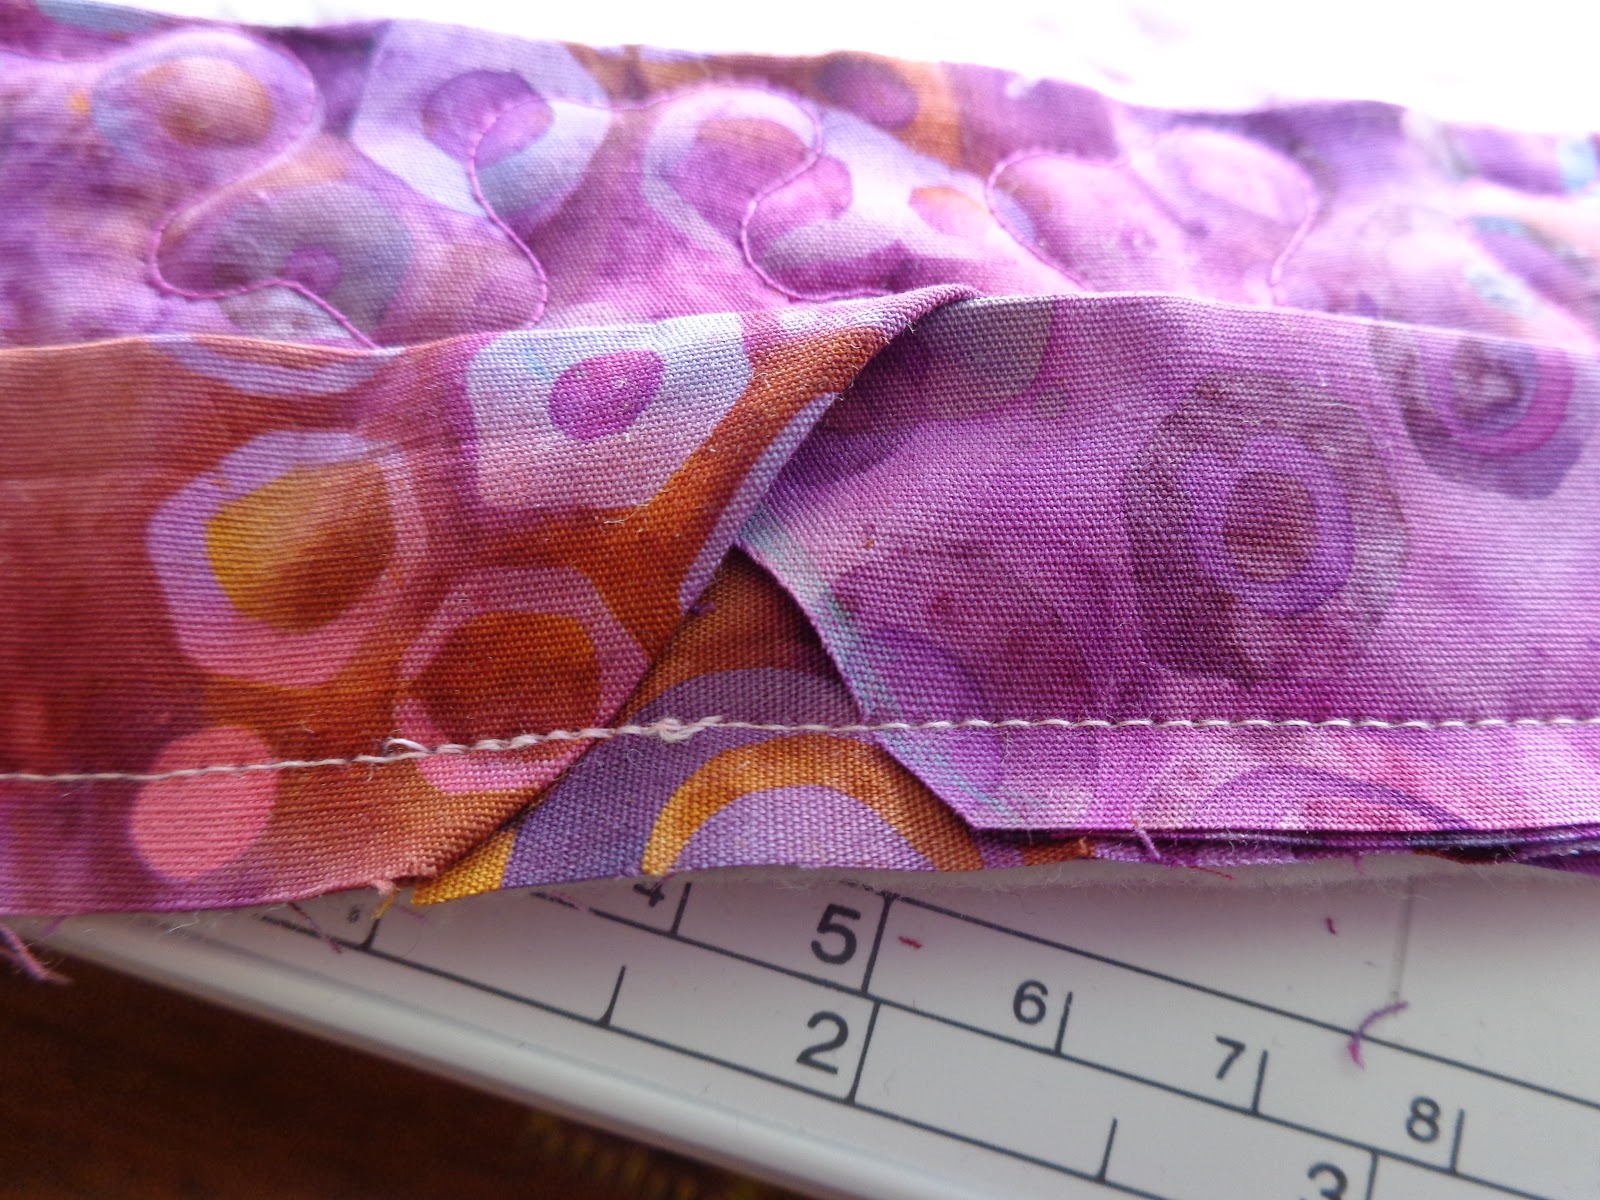 It Takes a Village: Here's a Step-by-Step Binding Tutorial